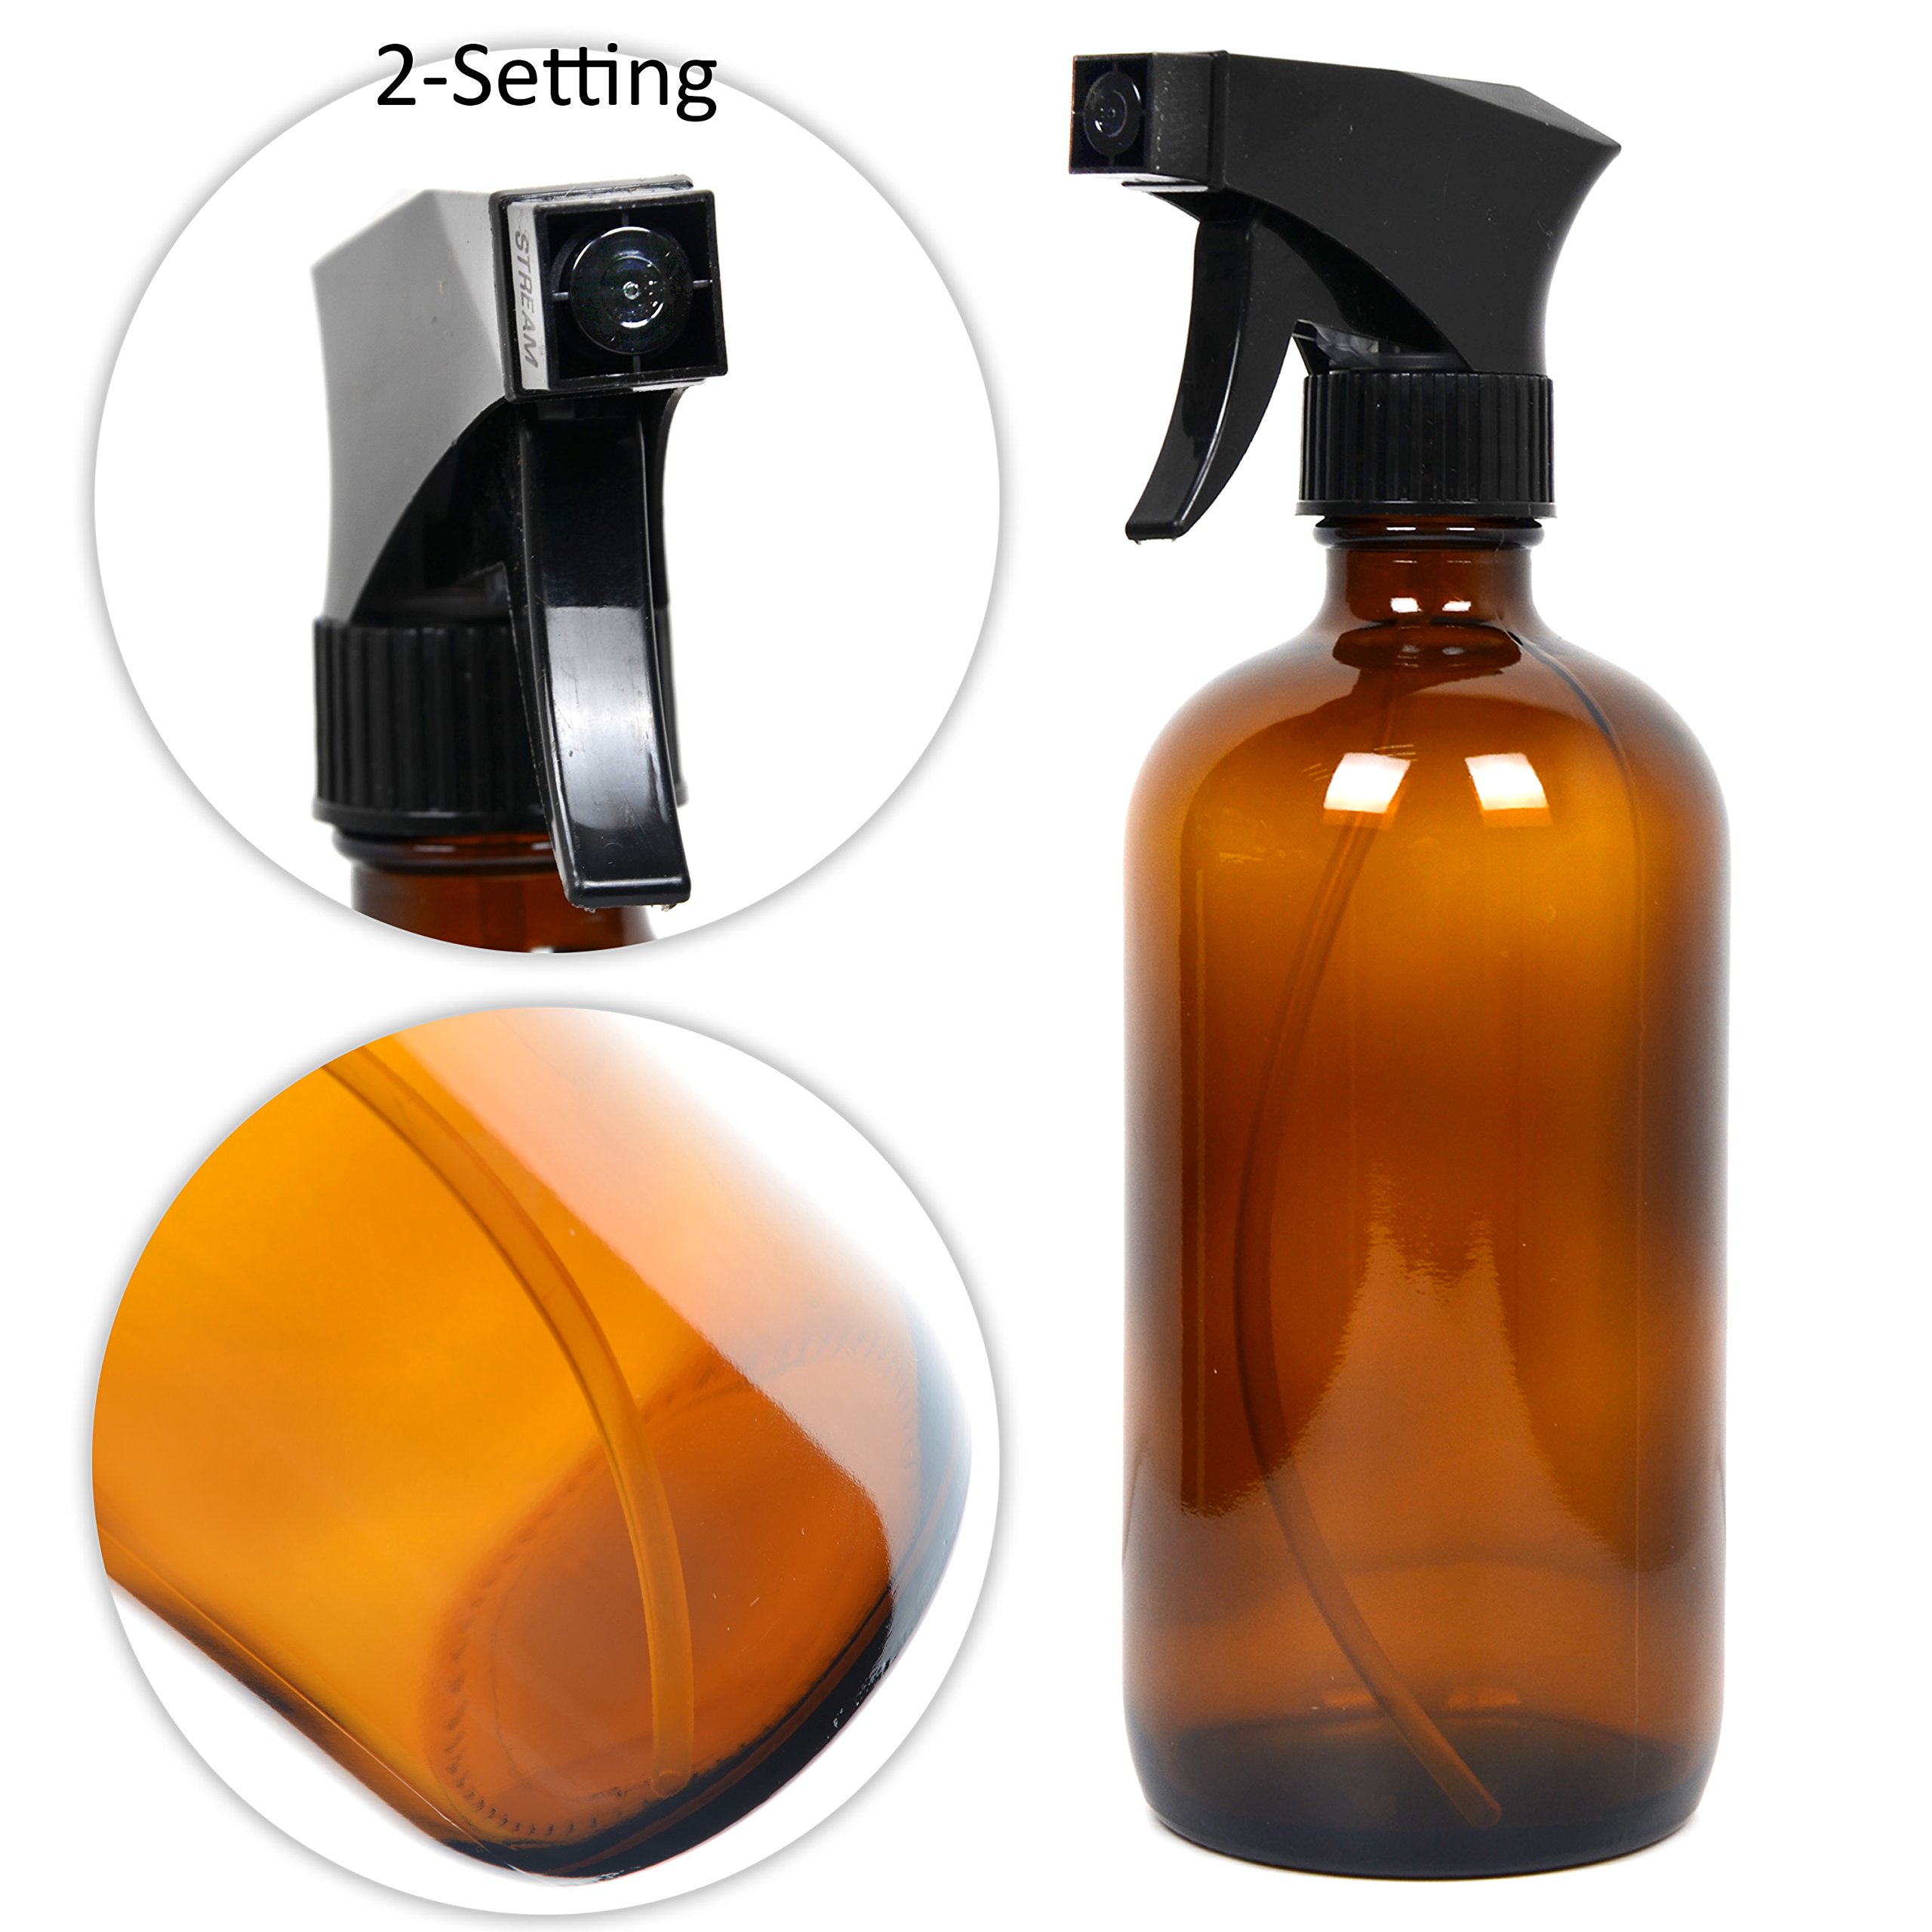 Youngever 7 Amber Glass Spray Bottles, 2 Pack 16 Ounce Empty Amber Spray Bottles, 1 Pack 8 Ounce Amber Spray Glass Bottle and 4 Pack 2 Ounce Glass Amber Spray Bottles for Essential Oils